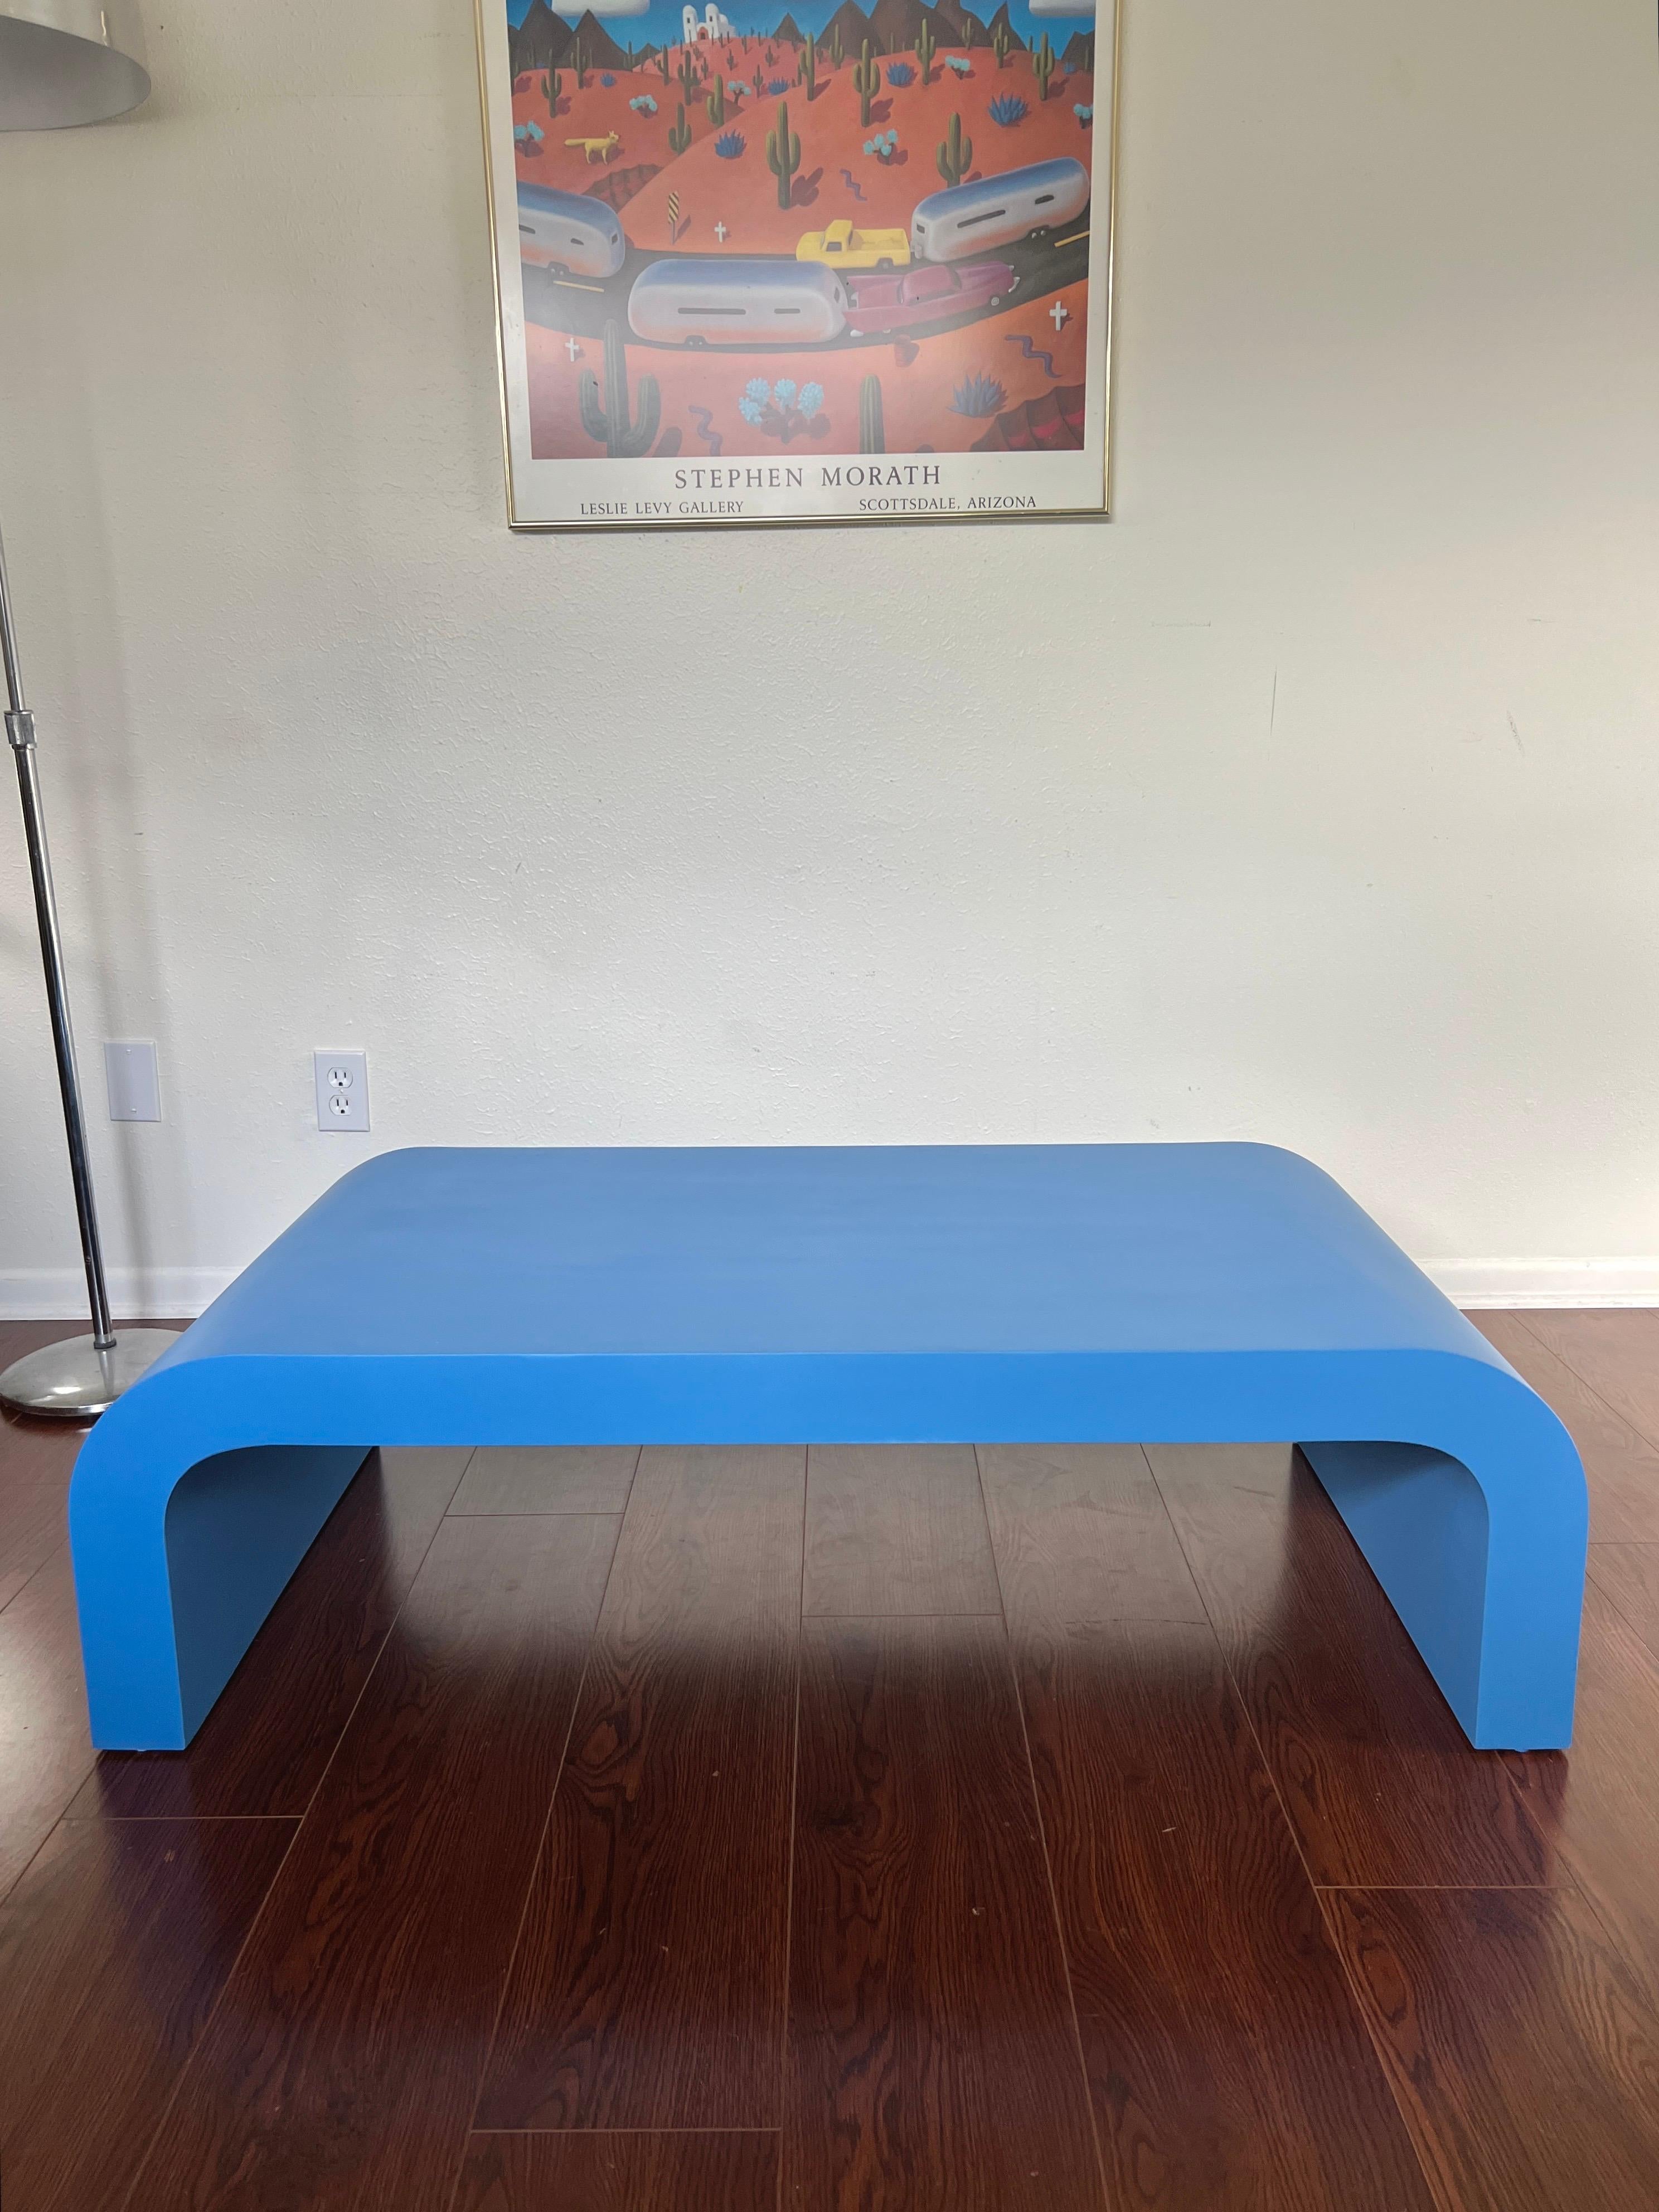 Vintage post modern waterfall coffee table in a gorgeous blue color. This waterfall design remains timeless with replicas all over the internet. Would look stunning in any home and compliment both vintage and modern styles. Recently refinished and